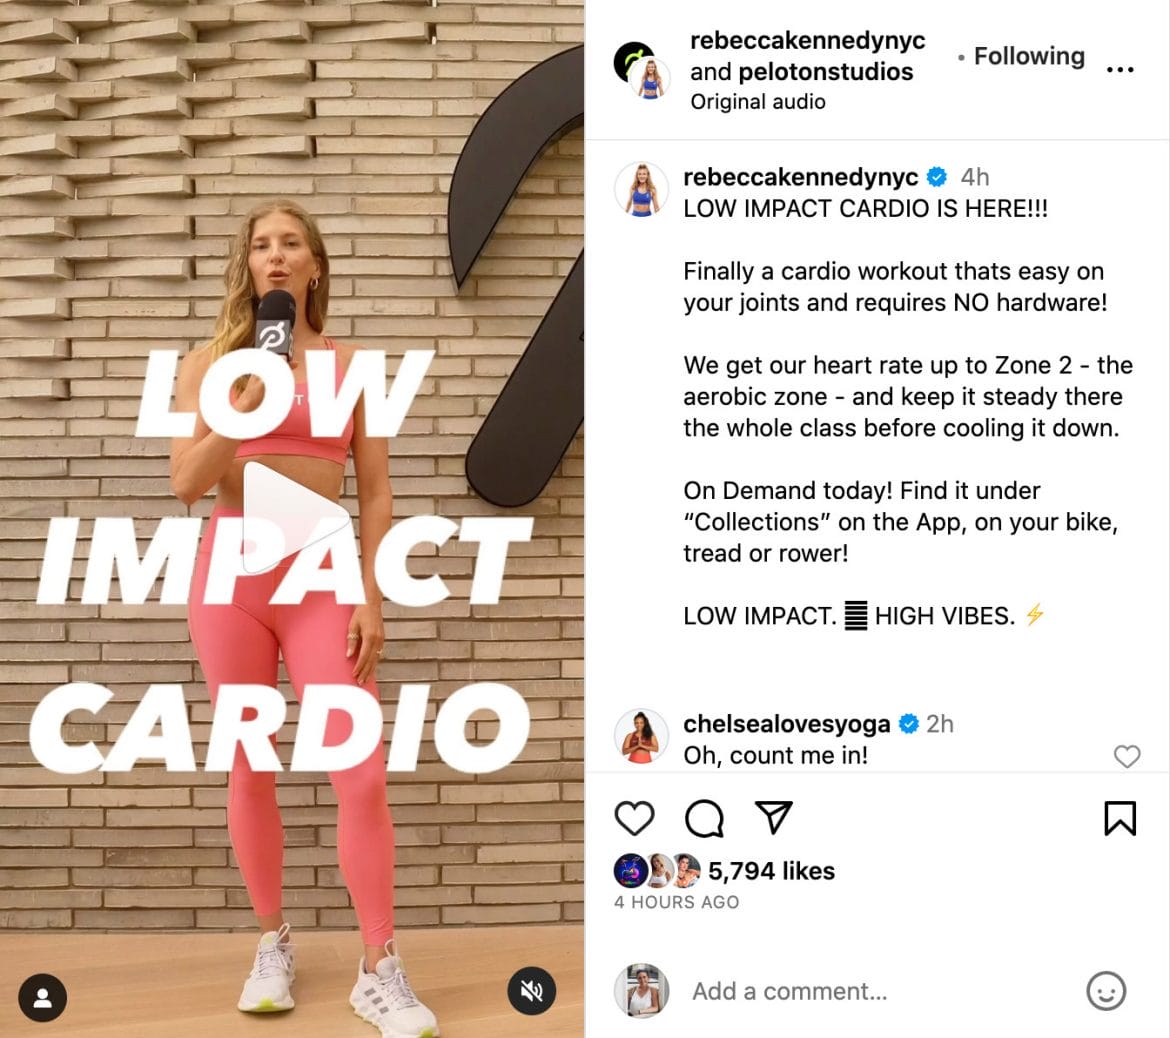 Rebecca Kennedy's Instagram post announcing Low Impact Cardio.